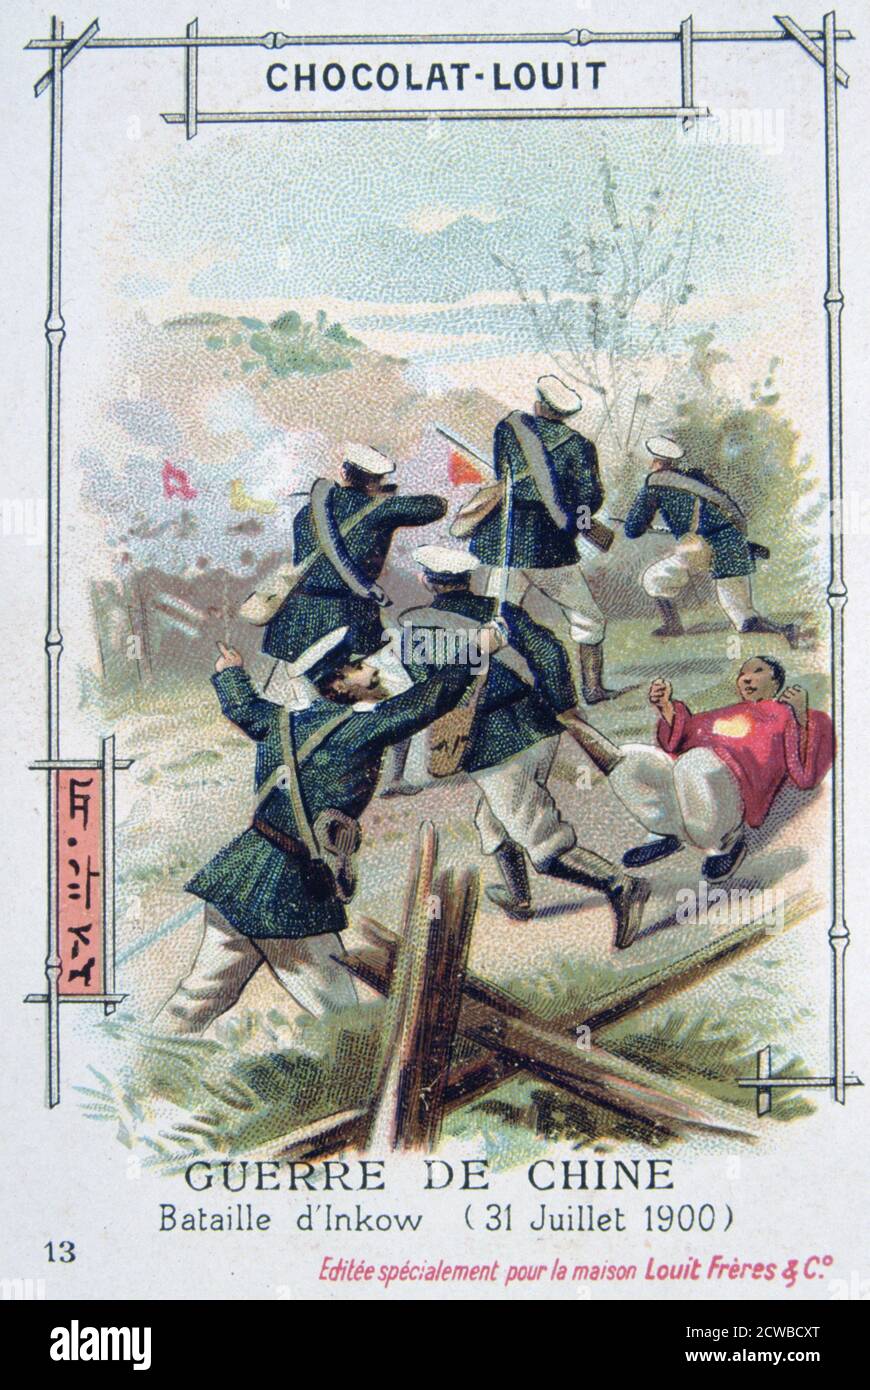 Battle at Inkow, China, Boxer Rebellion, 31 July 1900. The Boxer Uprising or Boxer Rebellion was a Chinese rebellion from November 1899 to September 7, 1901 against foreign influence in trade, politics, religion and technology in China during the final years of the Qing Dynasty. The assassination of the German ambassador and the siege of foreign diplomatic legations in Peking prompted Britain, France, Germany, the US, Russia, Japan, Italy and Austria-Hungary to form the Eight Nation Alliance and intervene militarily. French trading card advertising Chocolat-Louit. The artist is unknown. Stock Photo